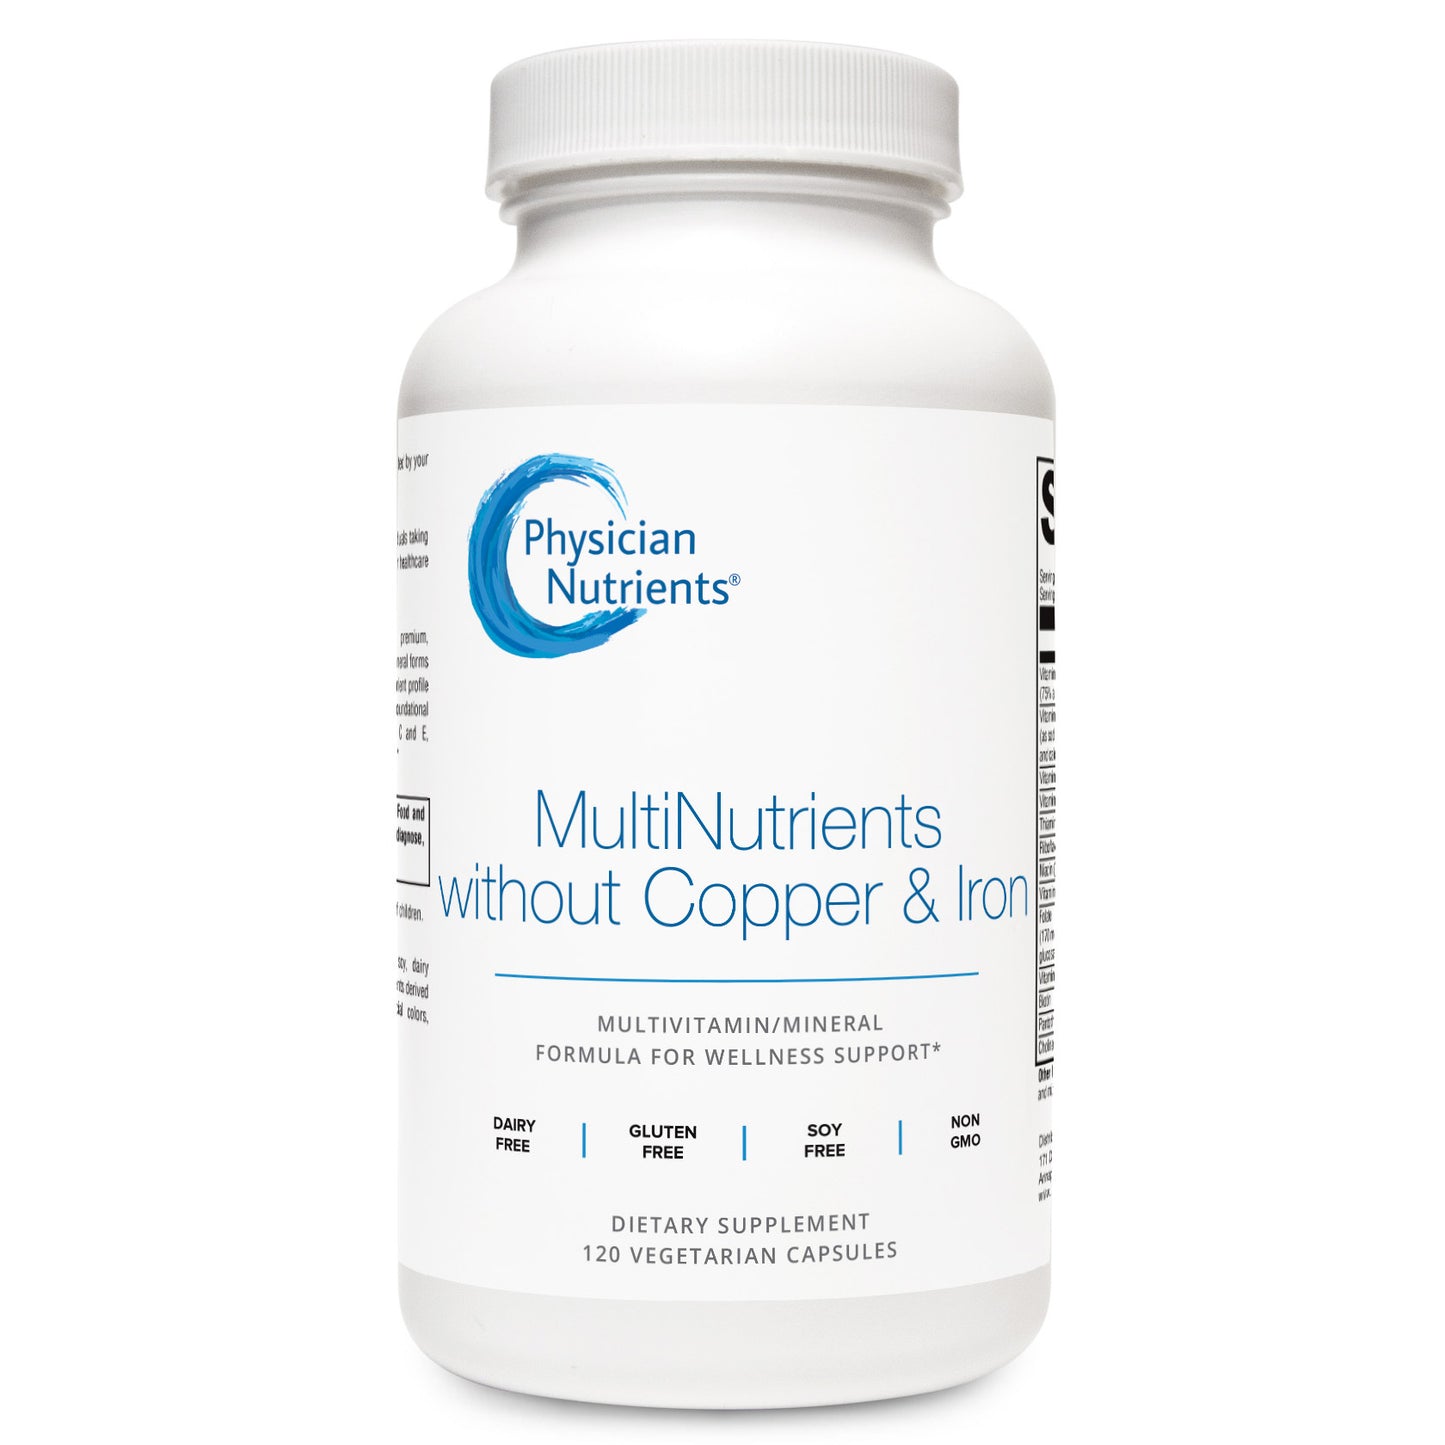 MultiNutrients without Copper & Iron